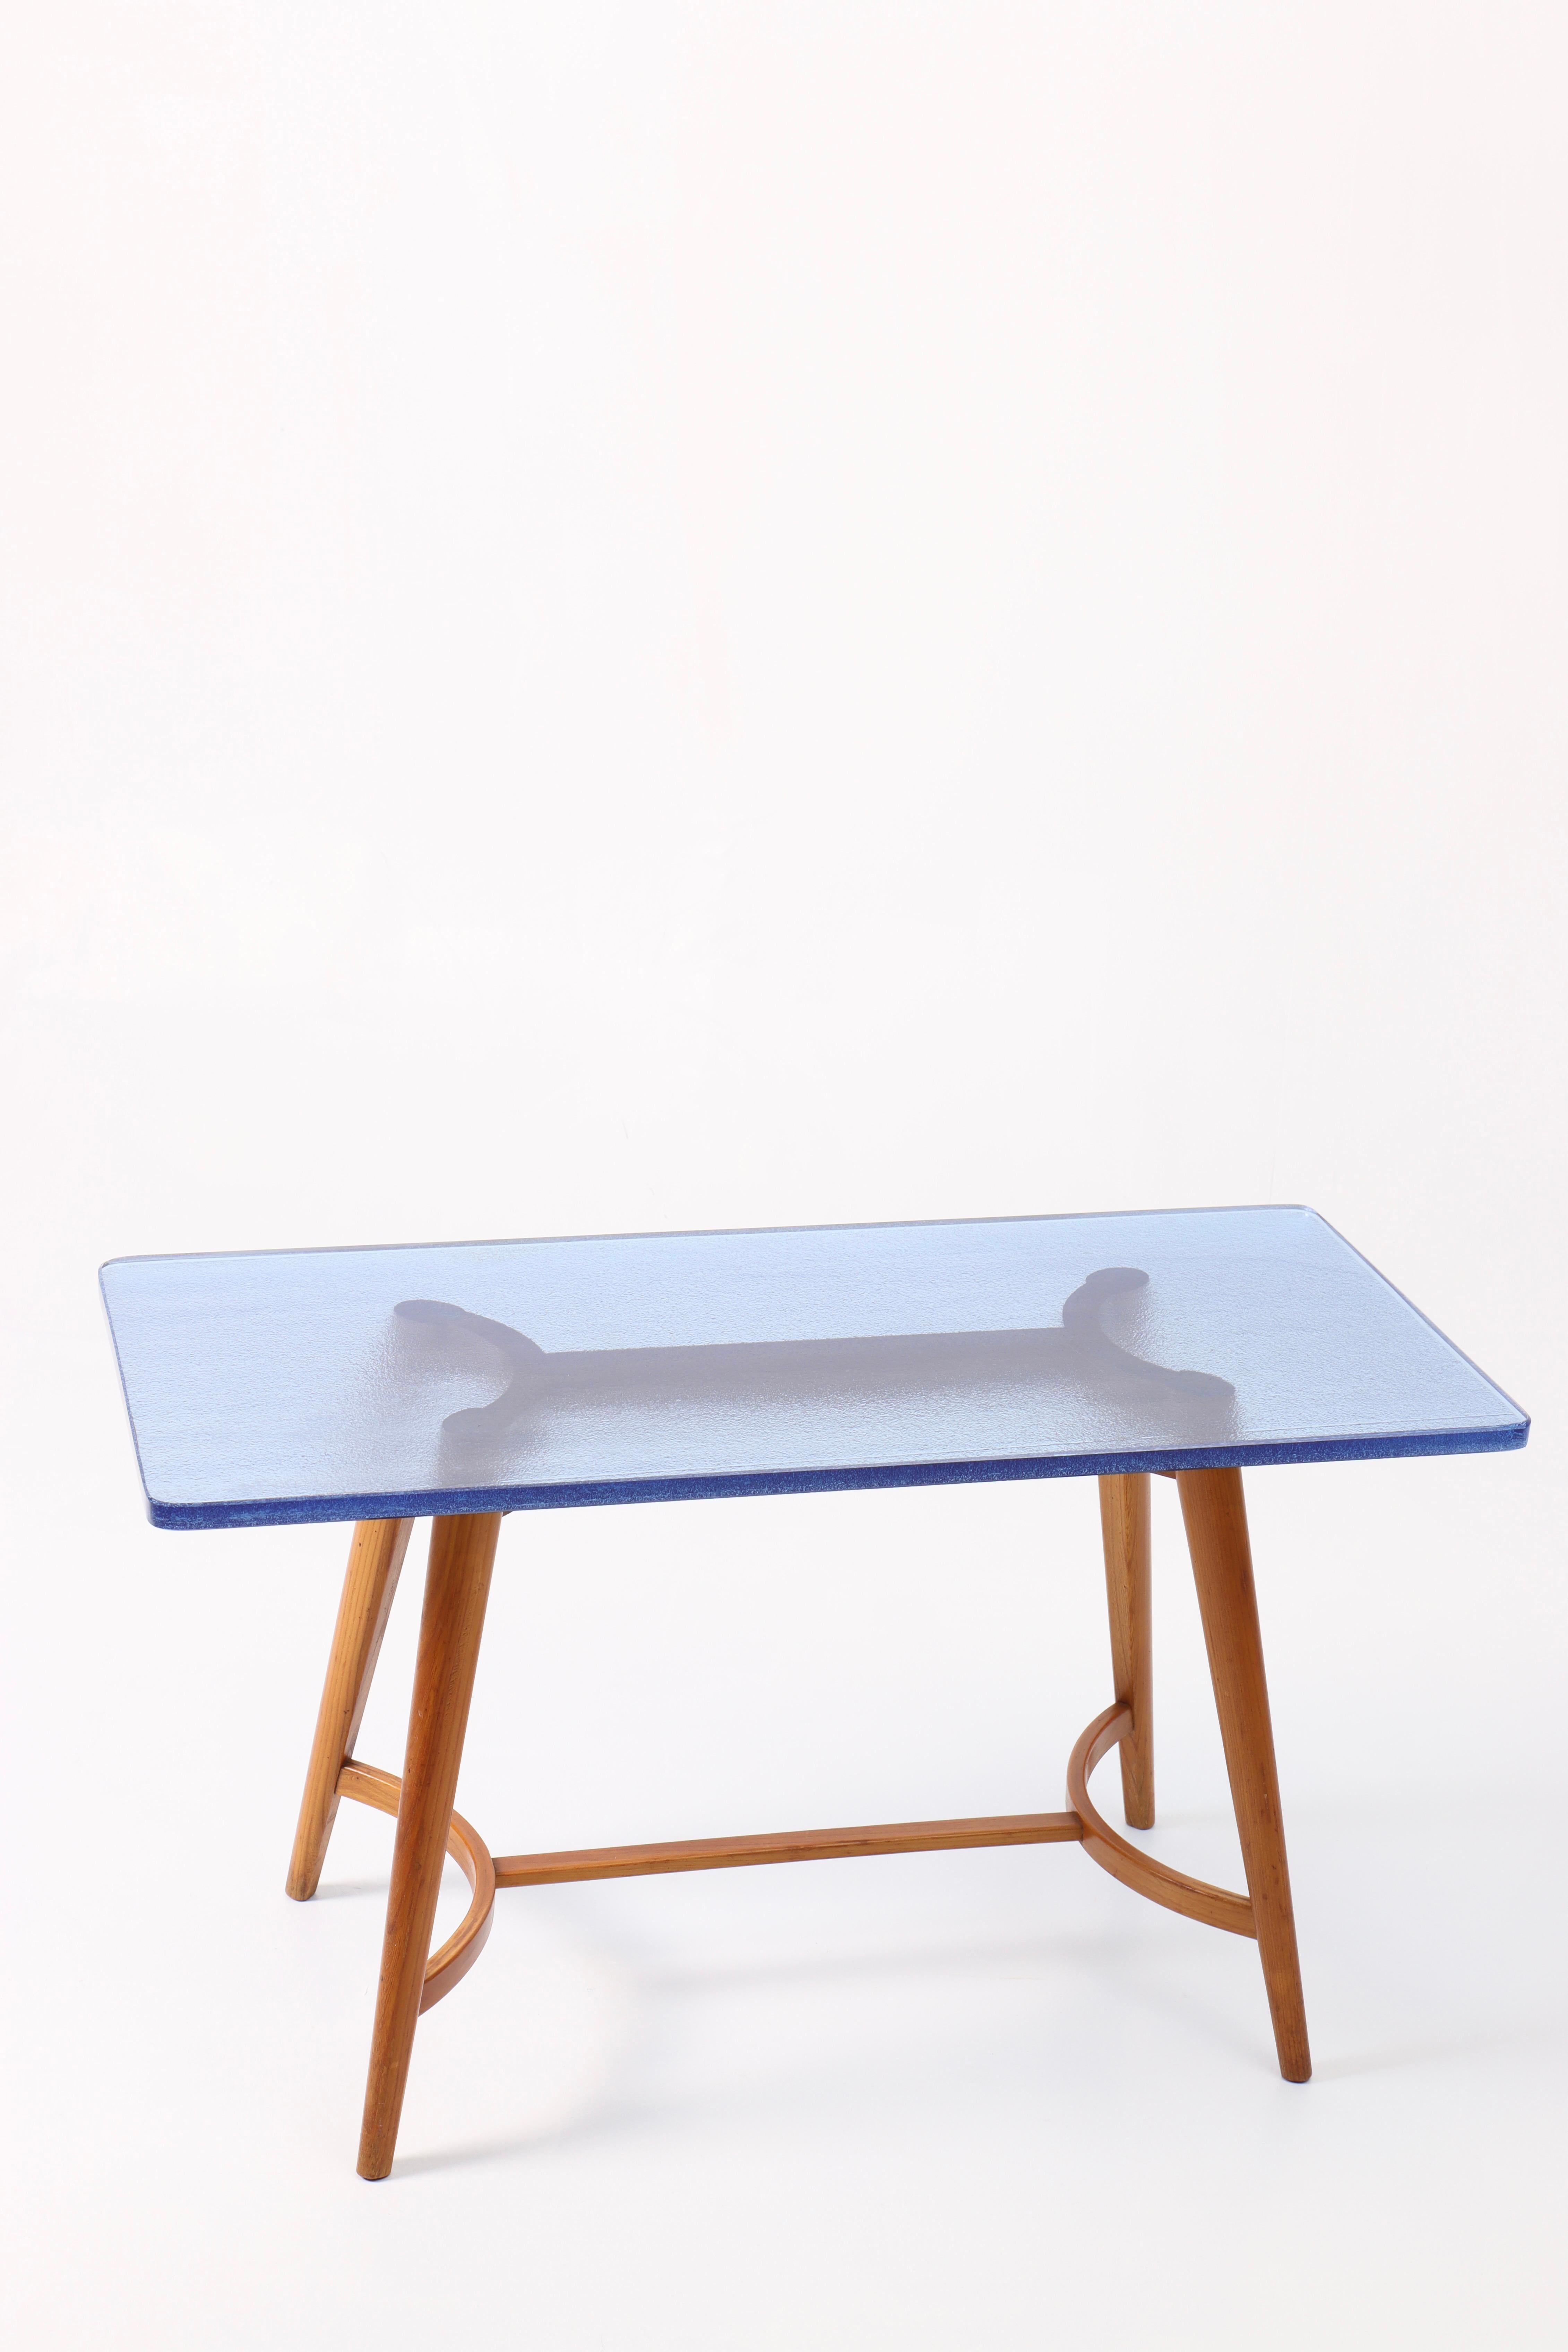 Mid-20th Century Midcentury Low Table in Glass and Elm, Made in Denmark, 1950s For Sale